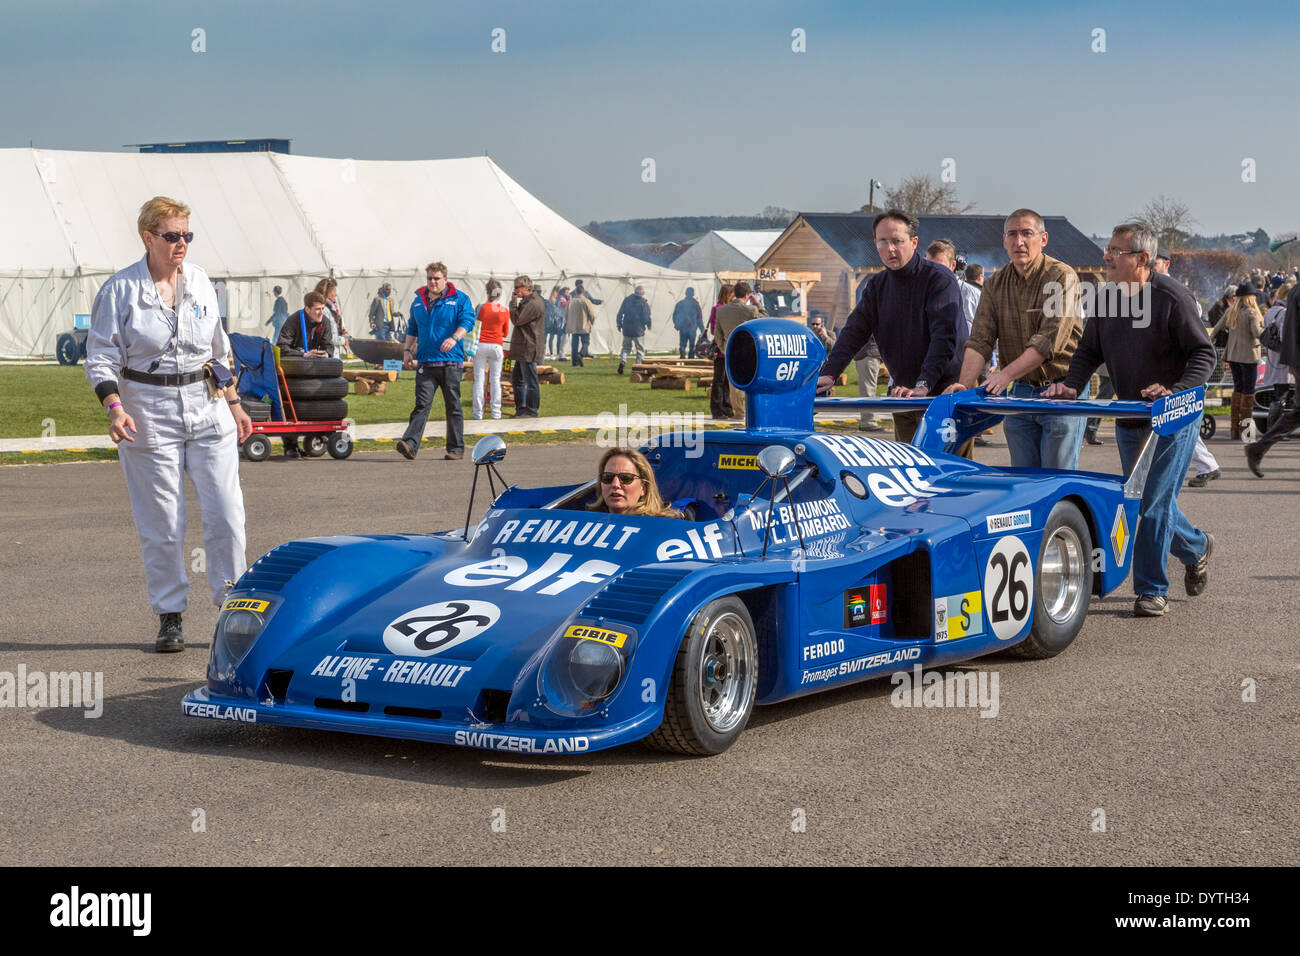 1975 Alpine-Renault A441 is pushed to the collection paddock, Low-drag Le Mans car, 72nd Goodwood Members meeting, Sussex, UK Stock Photo